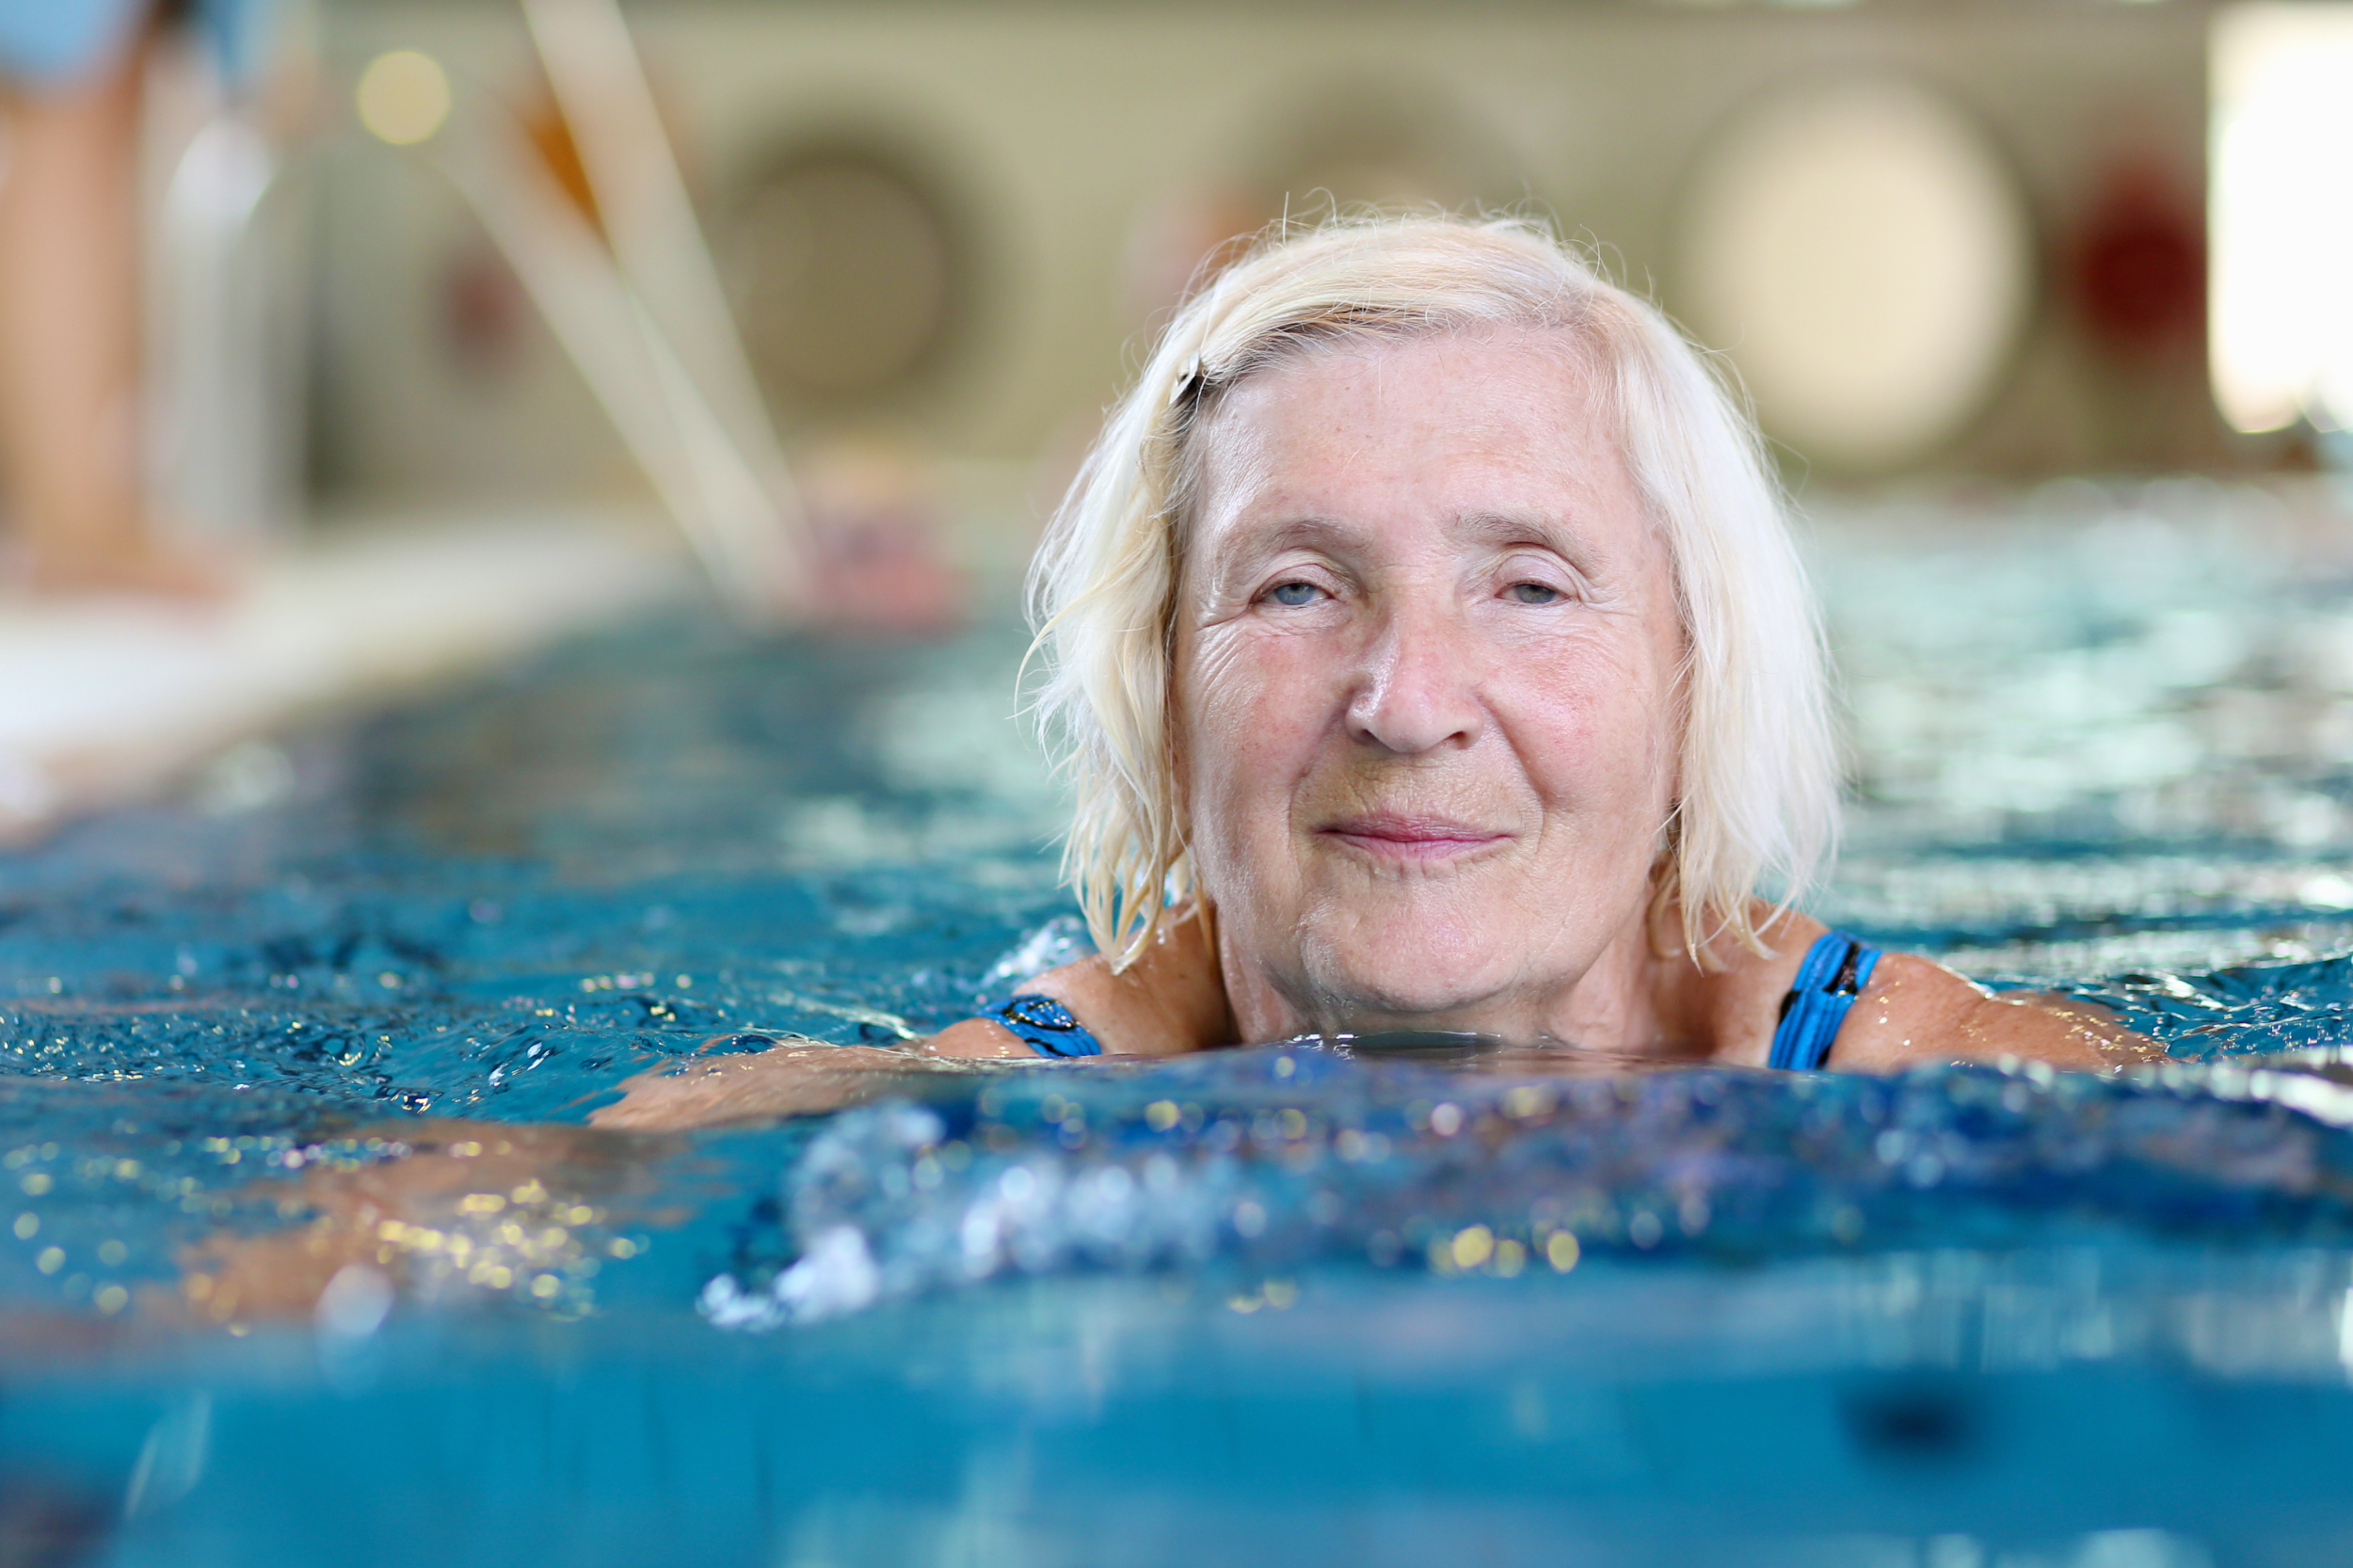 An older person is swimming in a pool and looks happy.